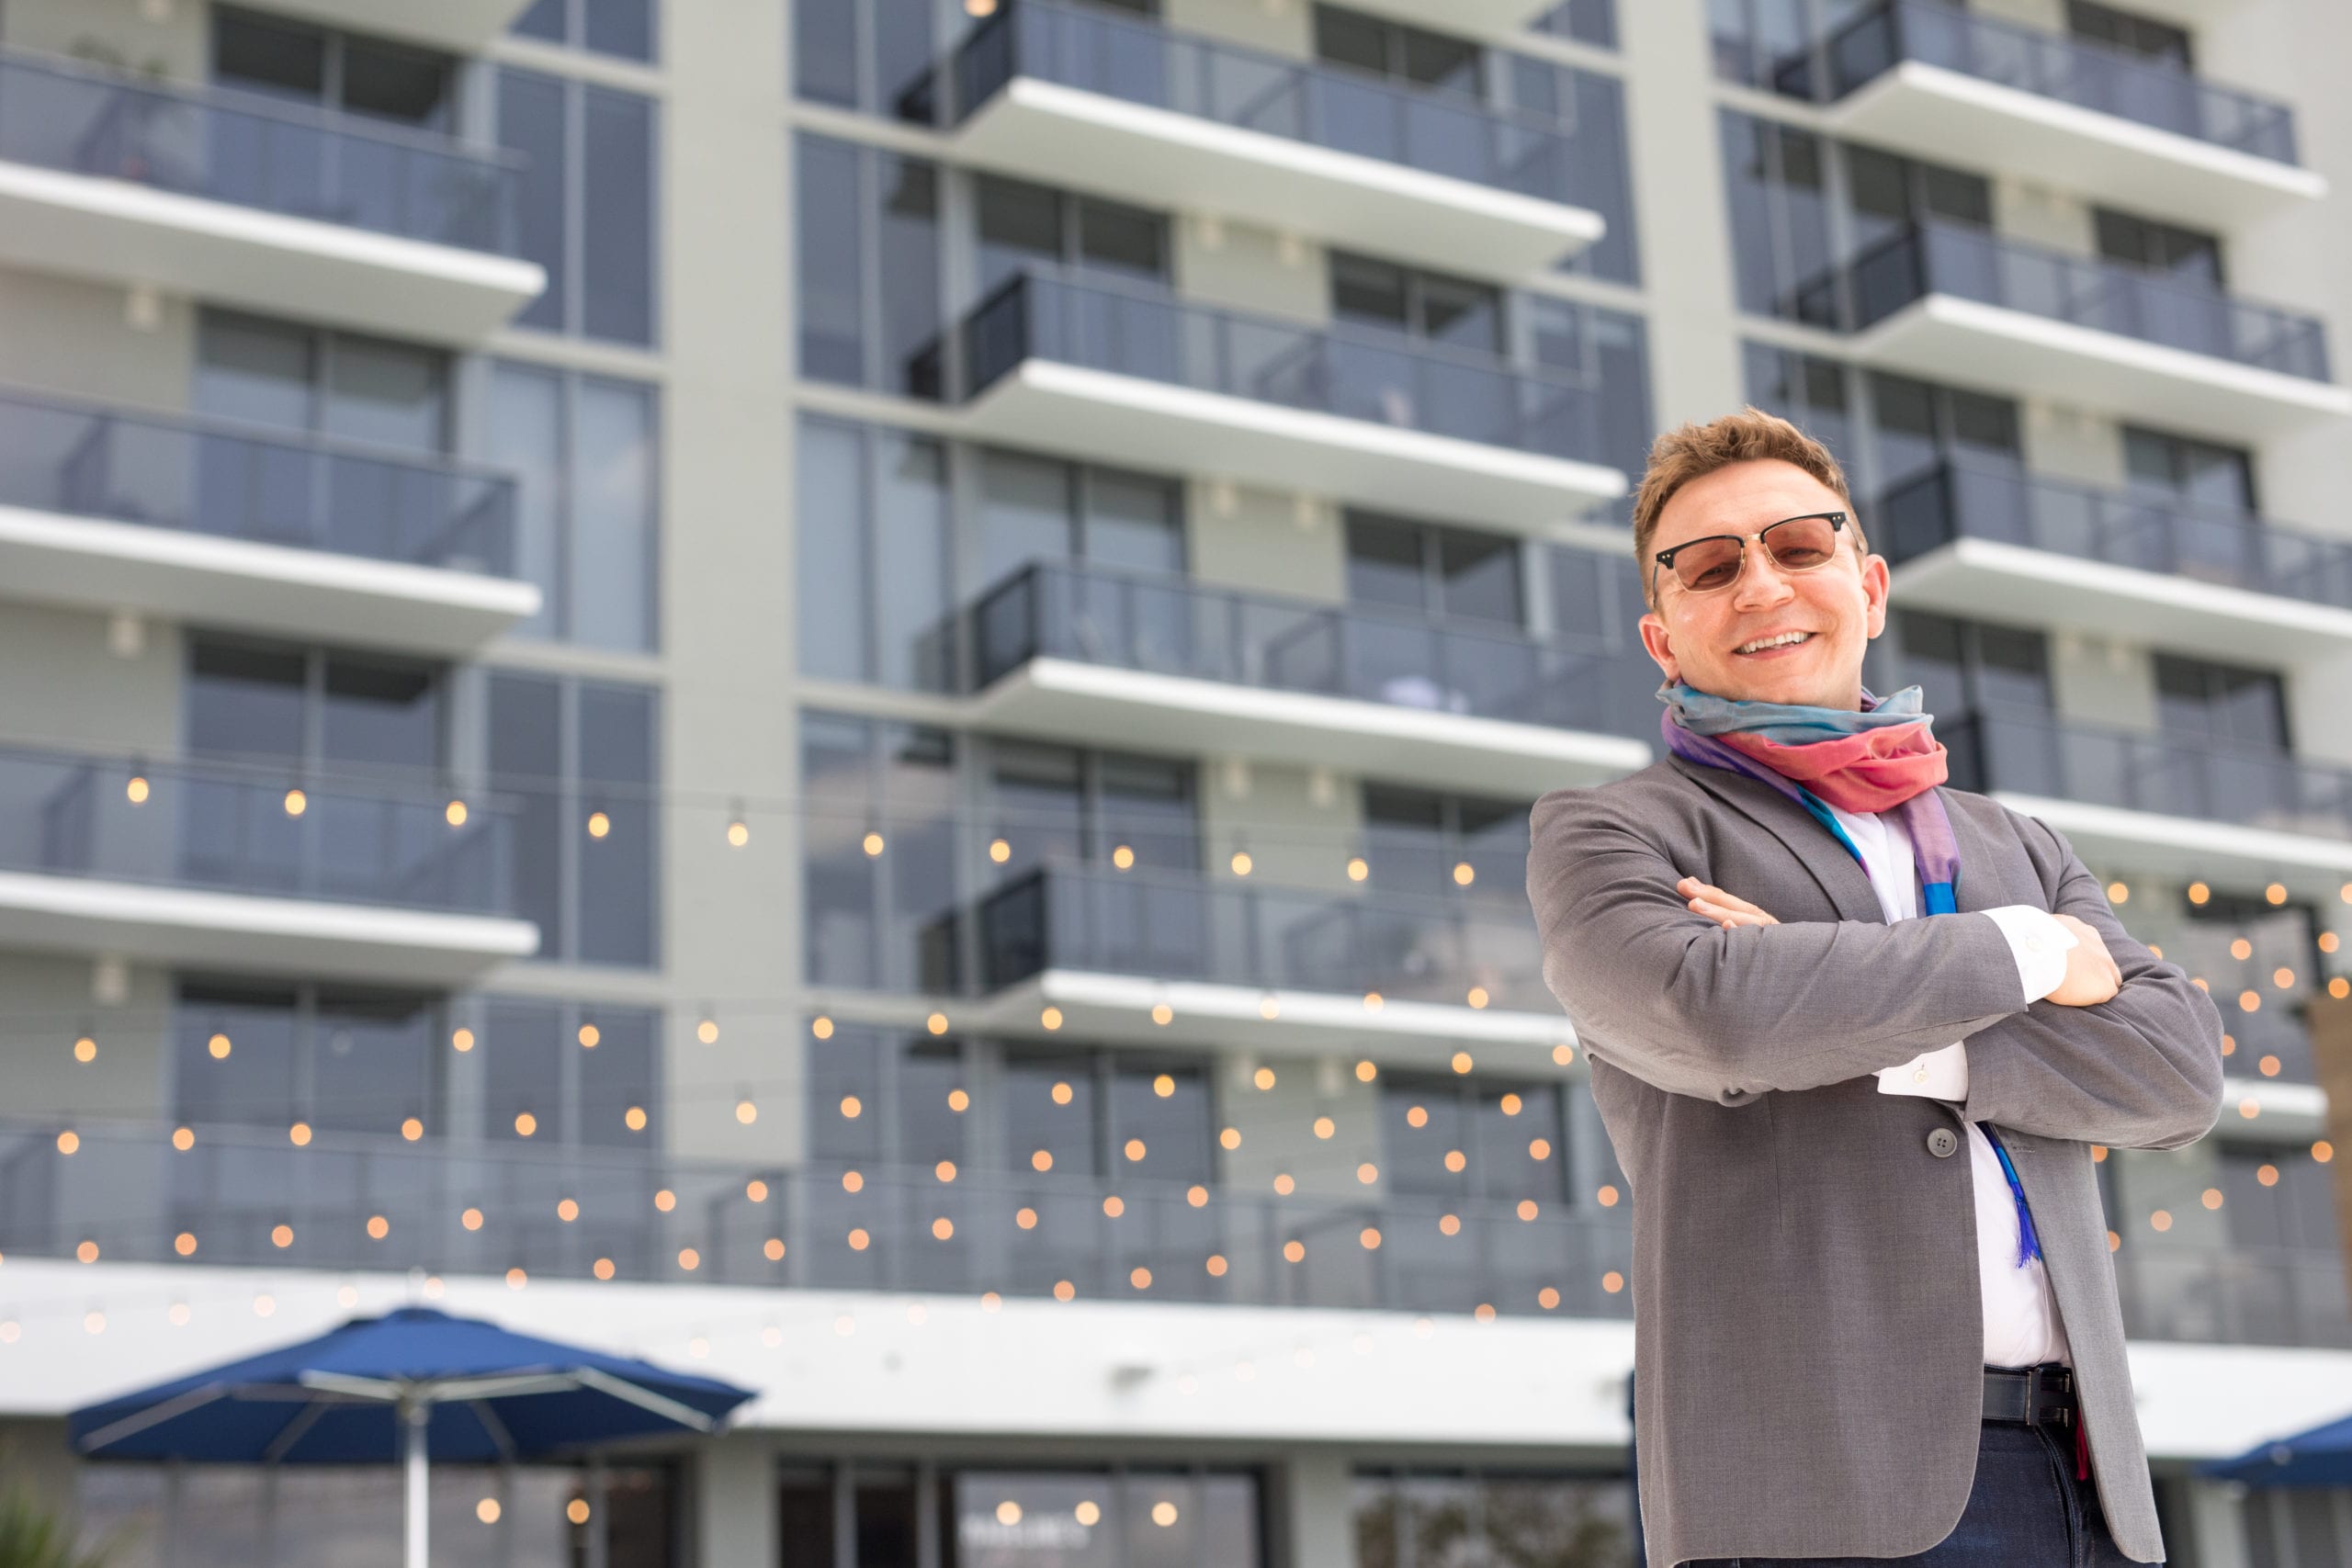 Fort Lauderdale Illustrated Men of Style Closeup of man wearing glasses, gray suit jacket and jeans and colorful scarf posing for the camera standing in front of a building